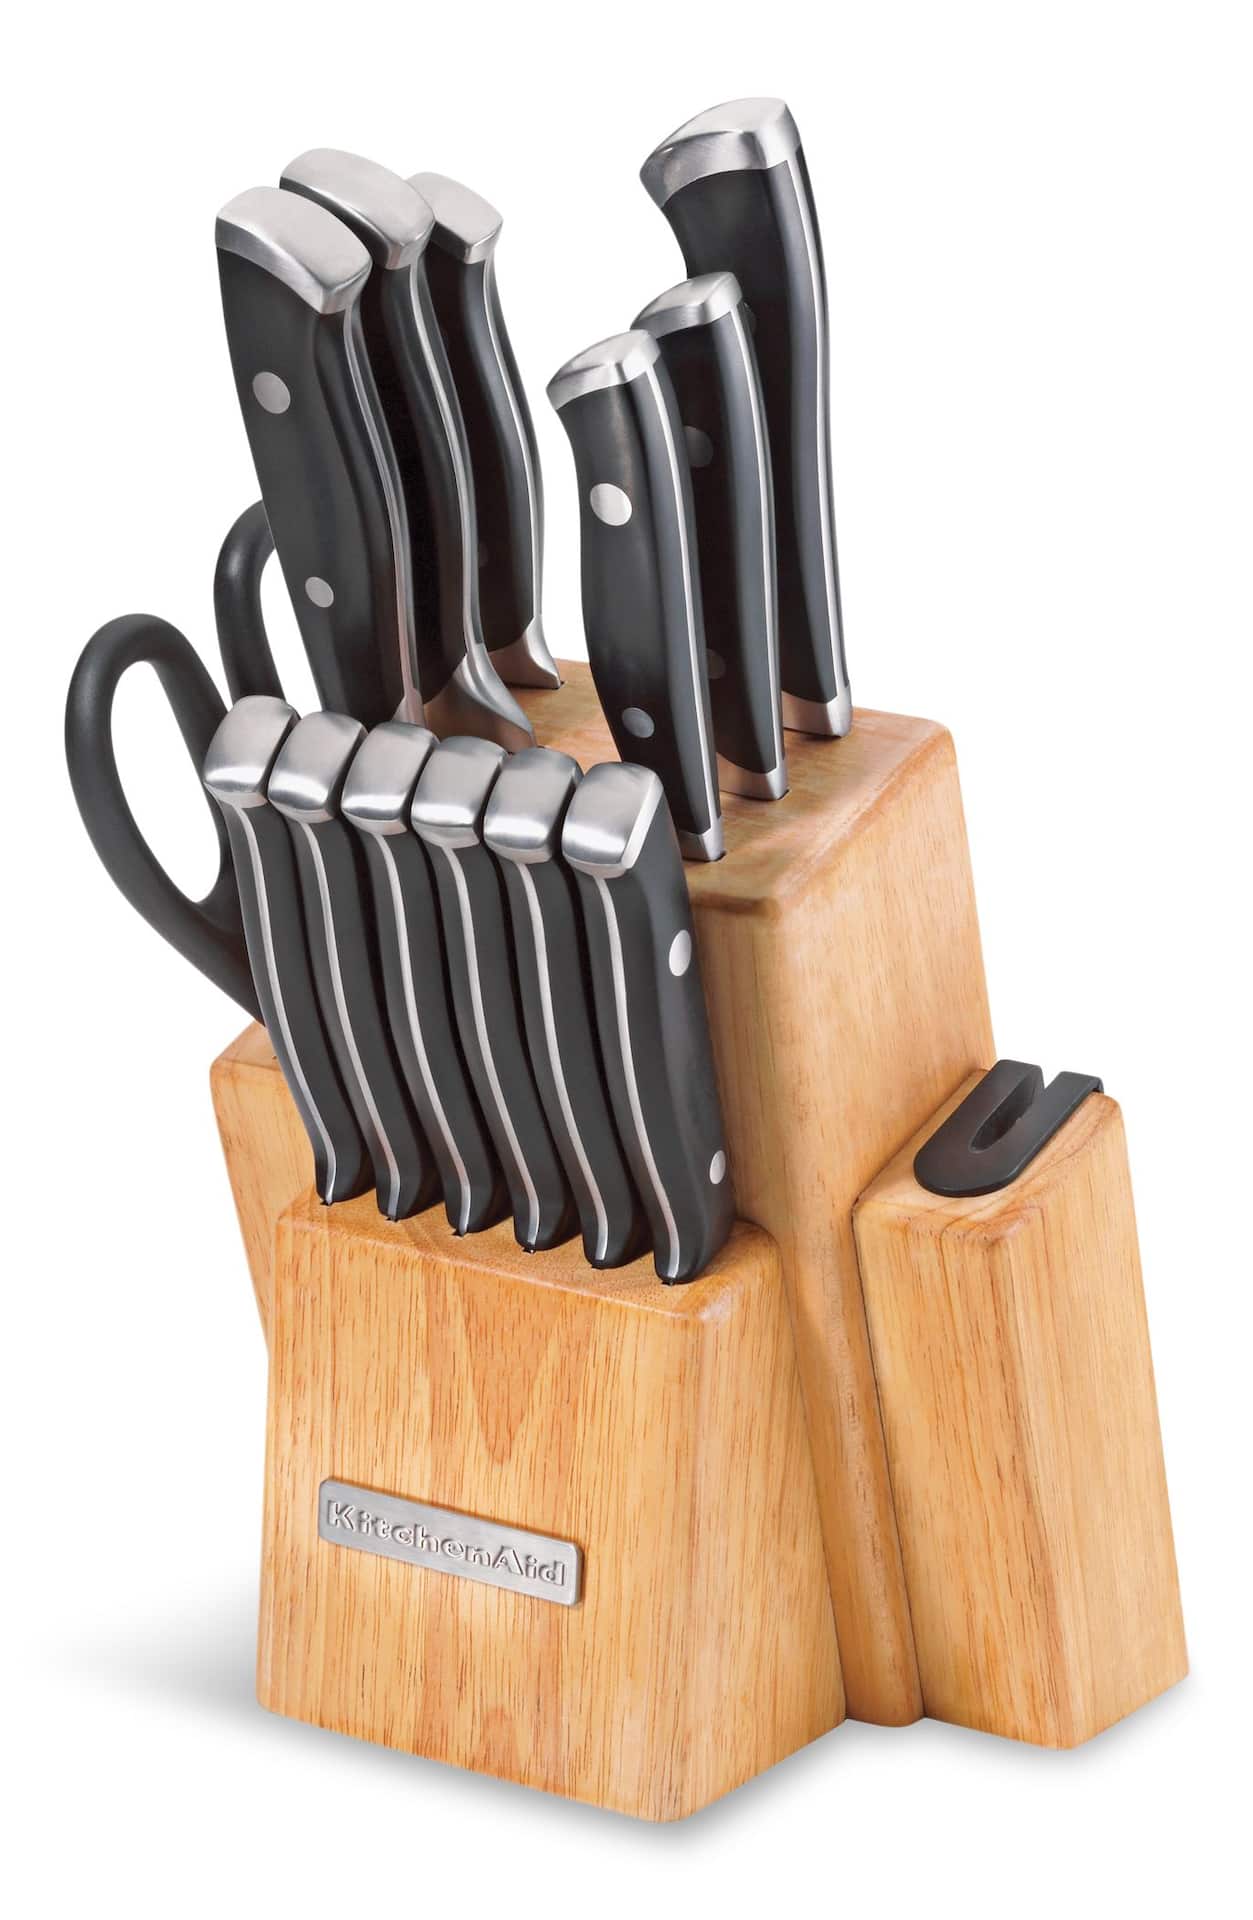 https://media-www.canadiantire.ca/product/living/kitchen/cutlery/1425195/k-aid-14pc-dual-rivet-forged-cutlery-d33e2175-0053-4eb0-a86e-1e11a2e41561-jpgrendition.jpg